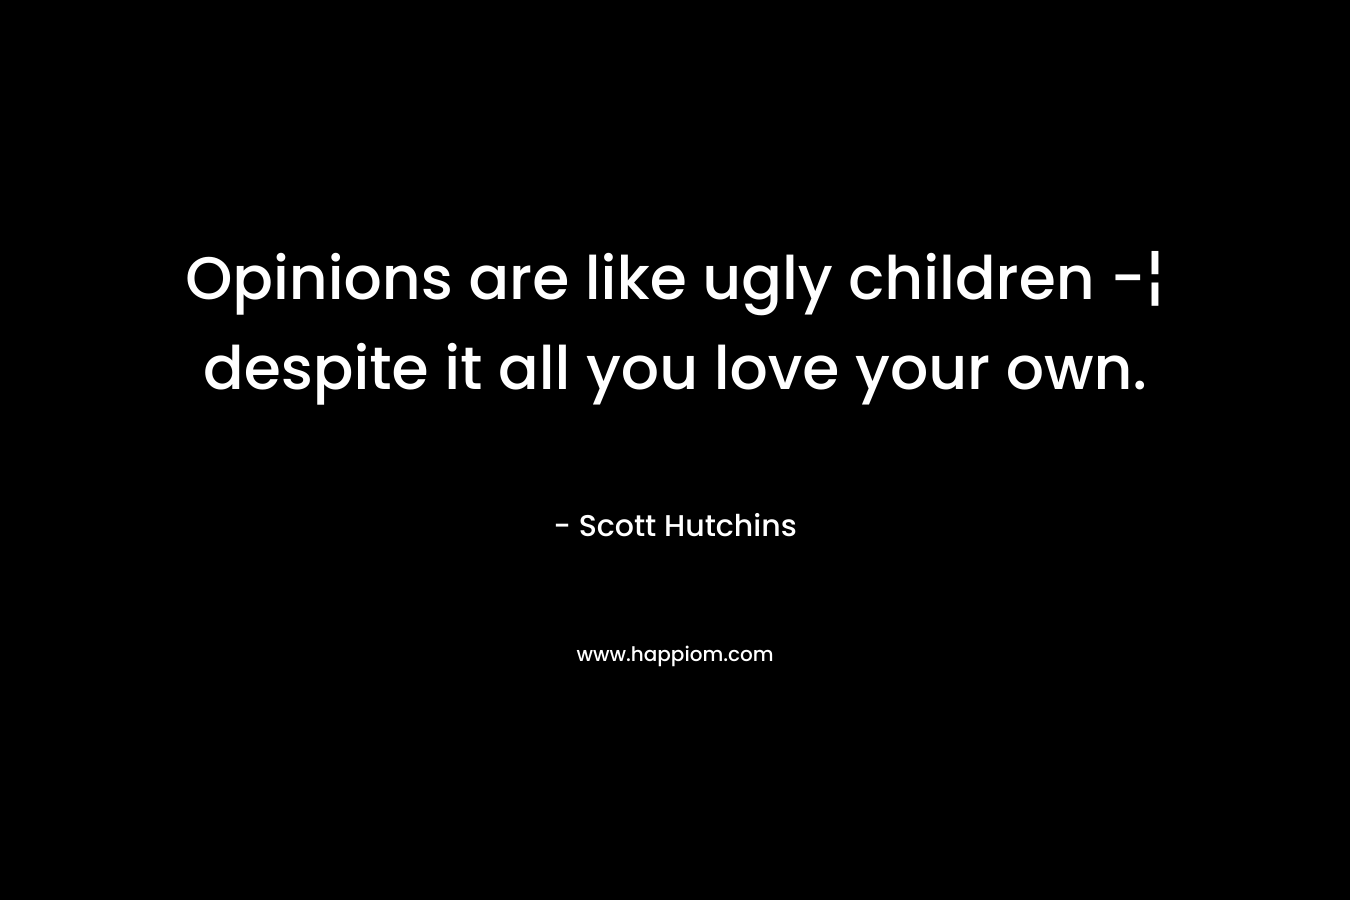 Opinions are like ugly children -¦ despite it all you love your own.